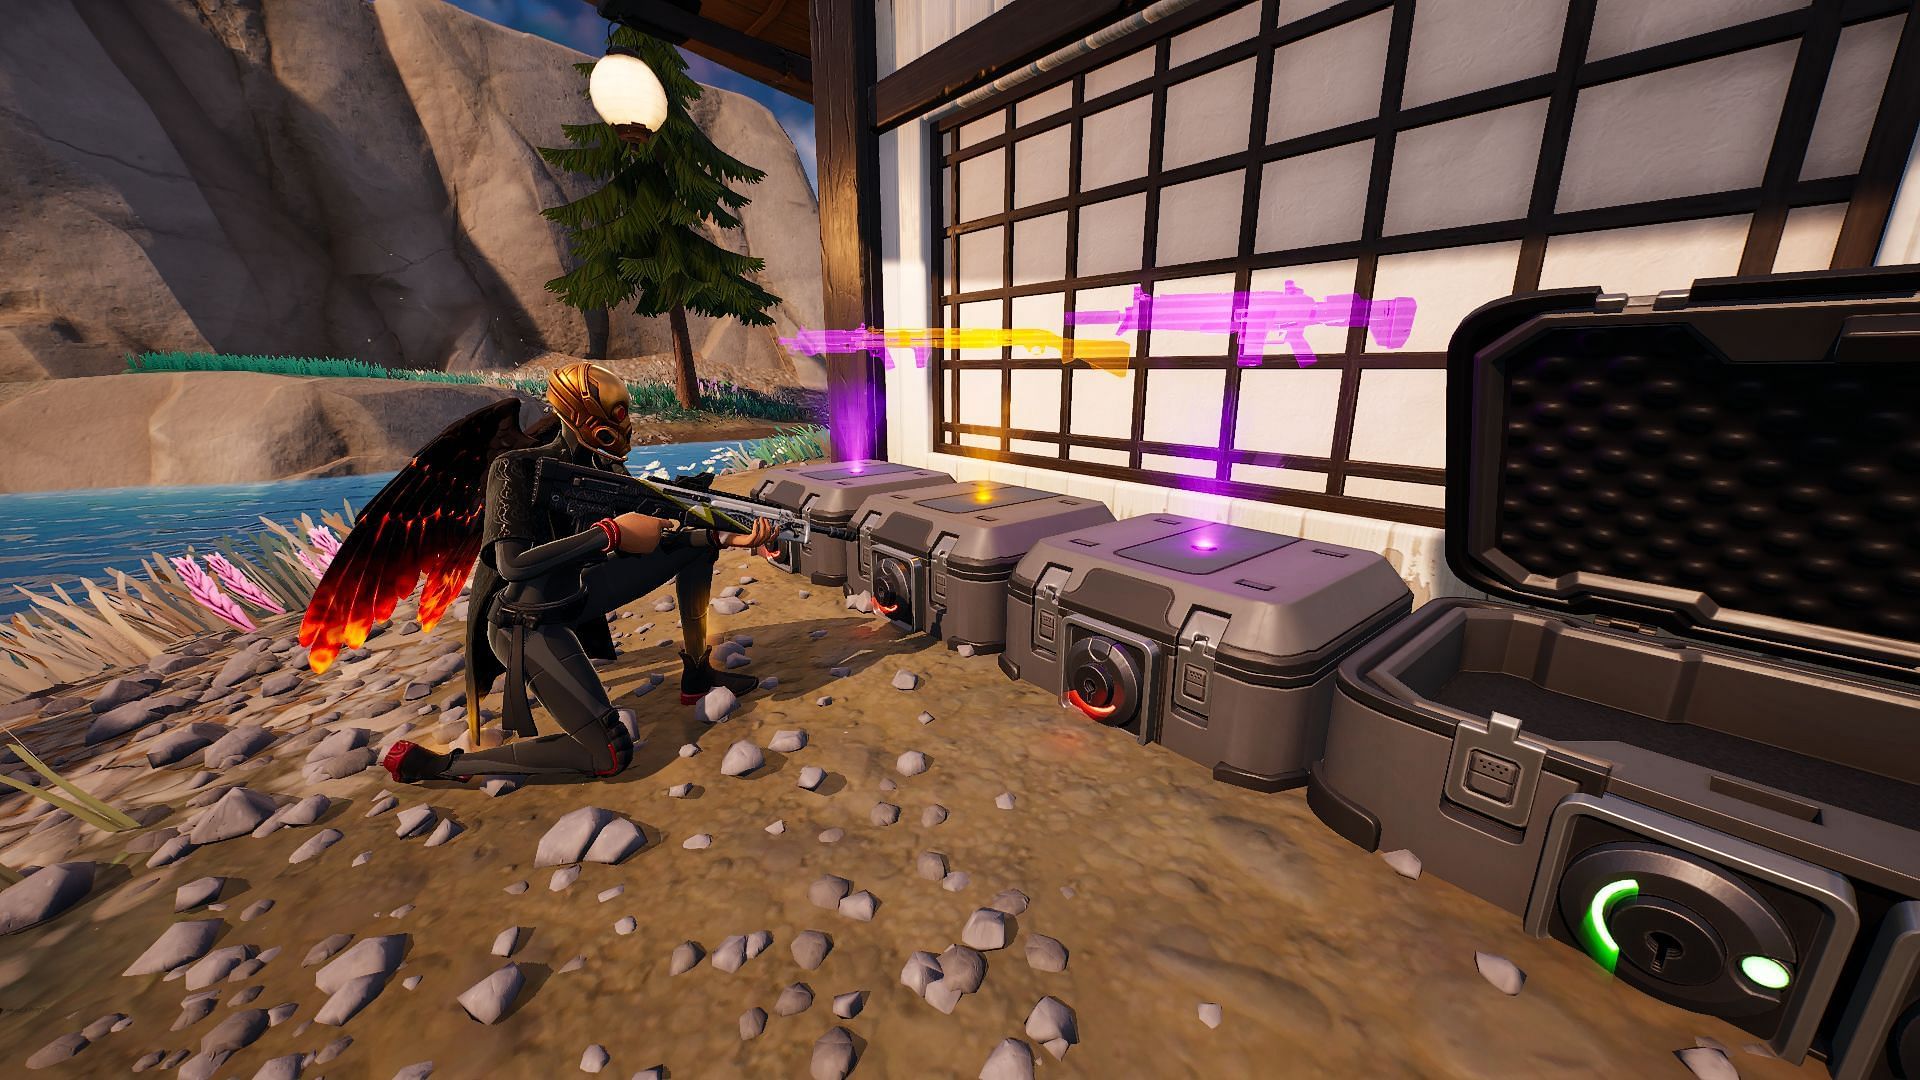 Holo-Chests provide a higher rarity of weapons (Image via Epic Games/Fortnite)